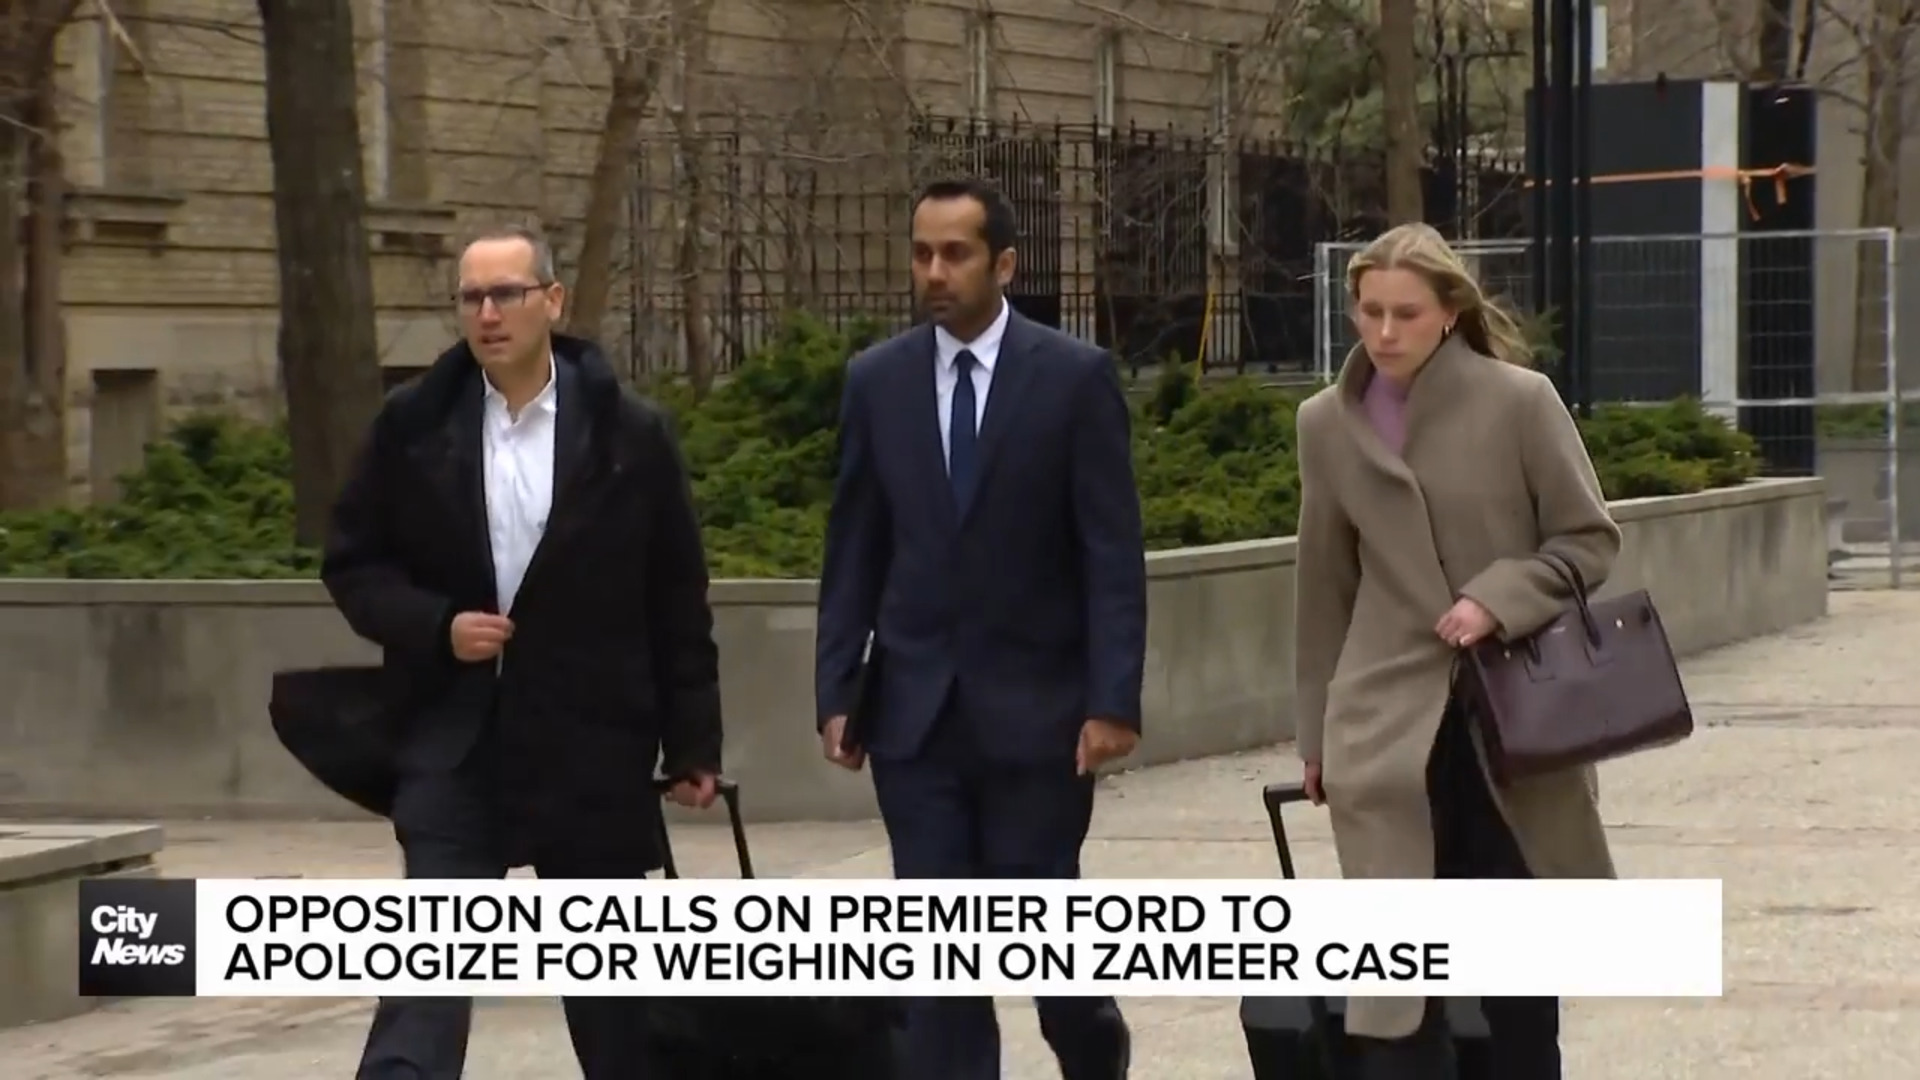 Opposition calls on Premier Ford to apologize for weighing in on Zameer case